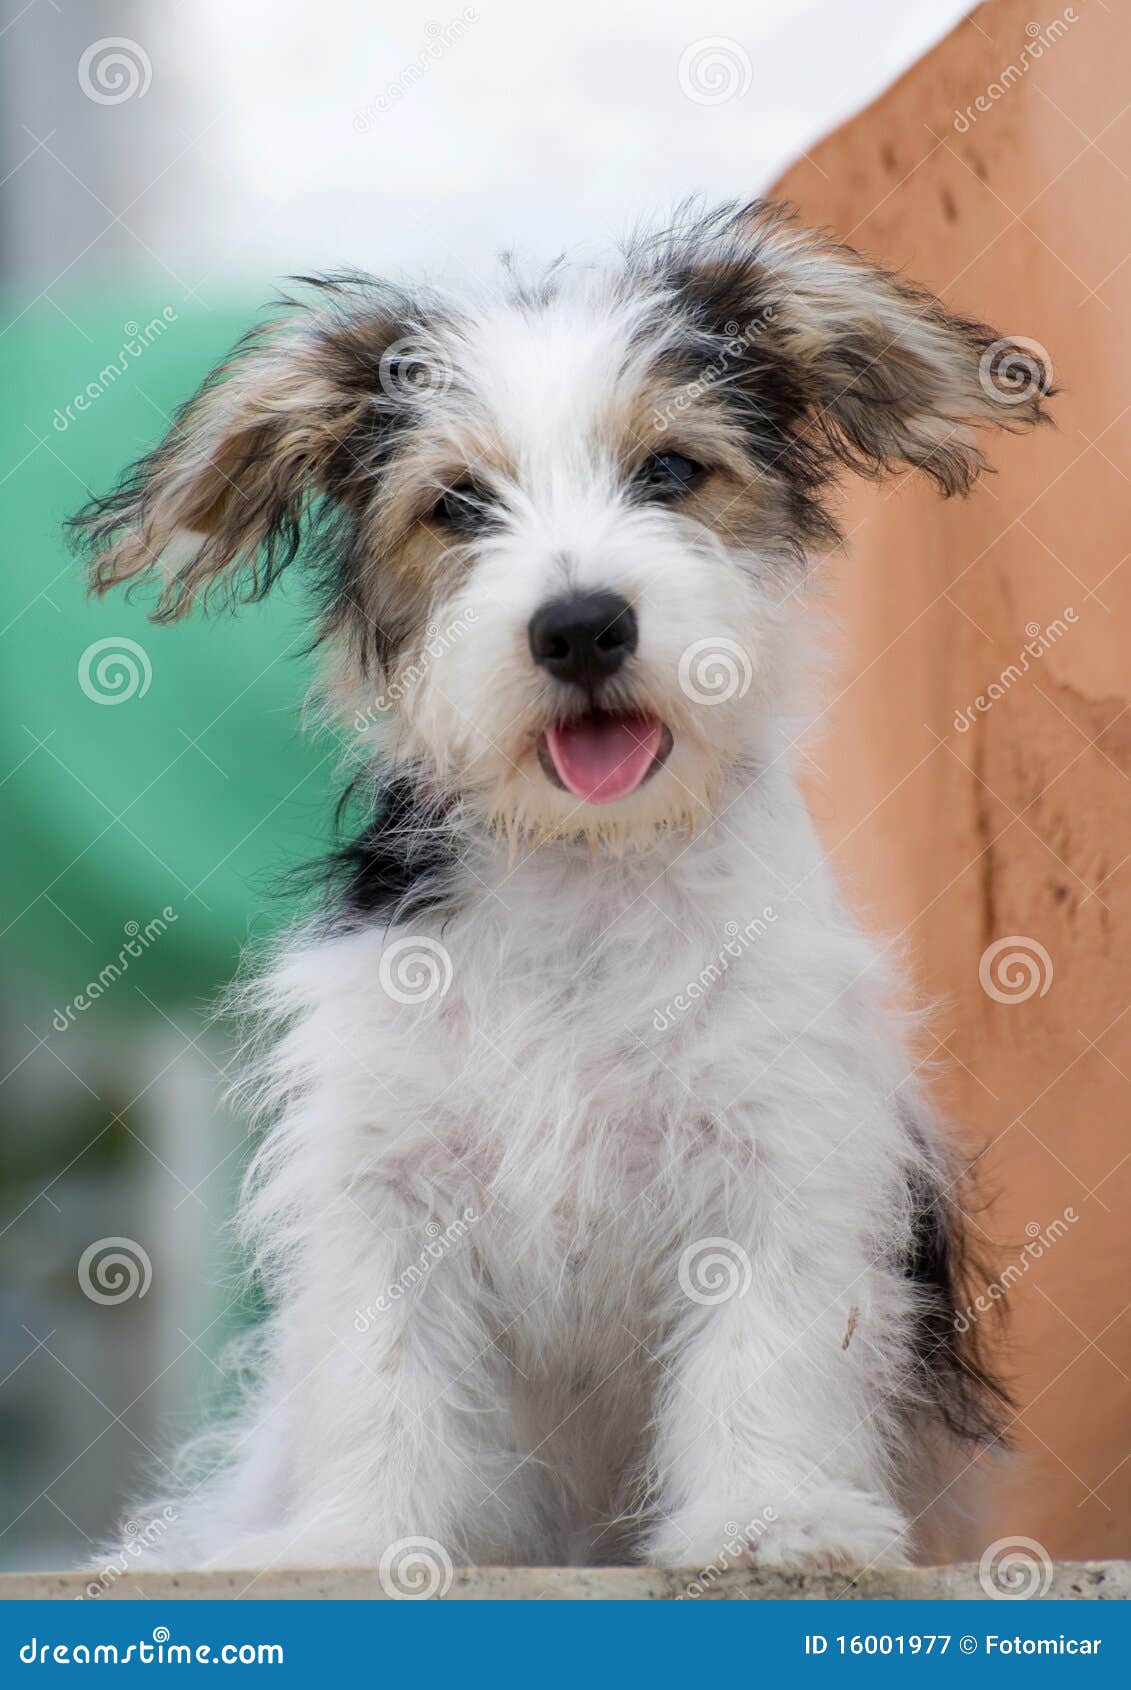 Jack Russell Puppy stock image. Image of friend, week -